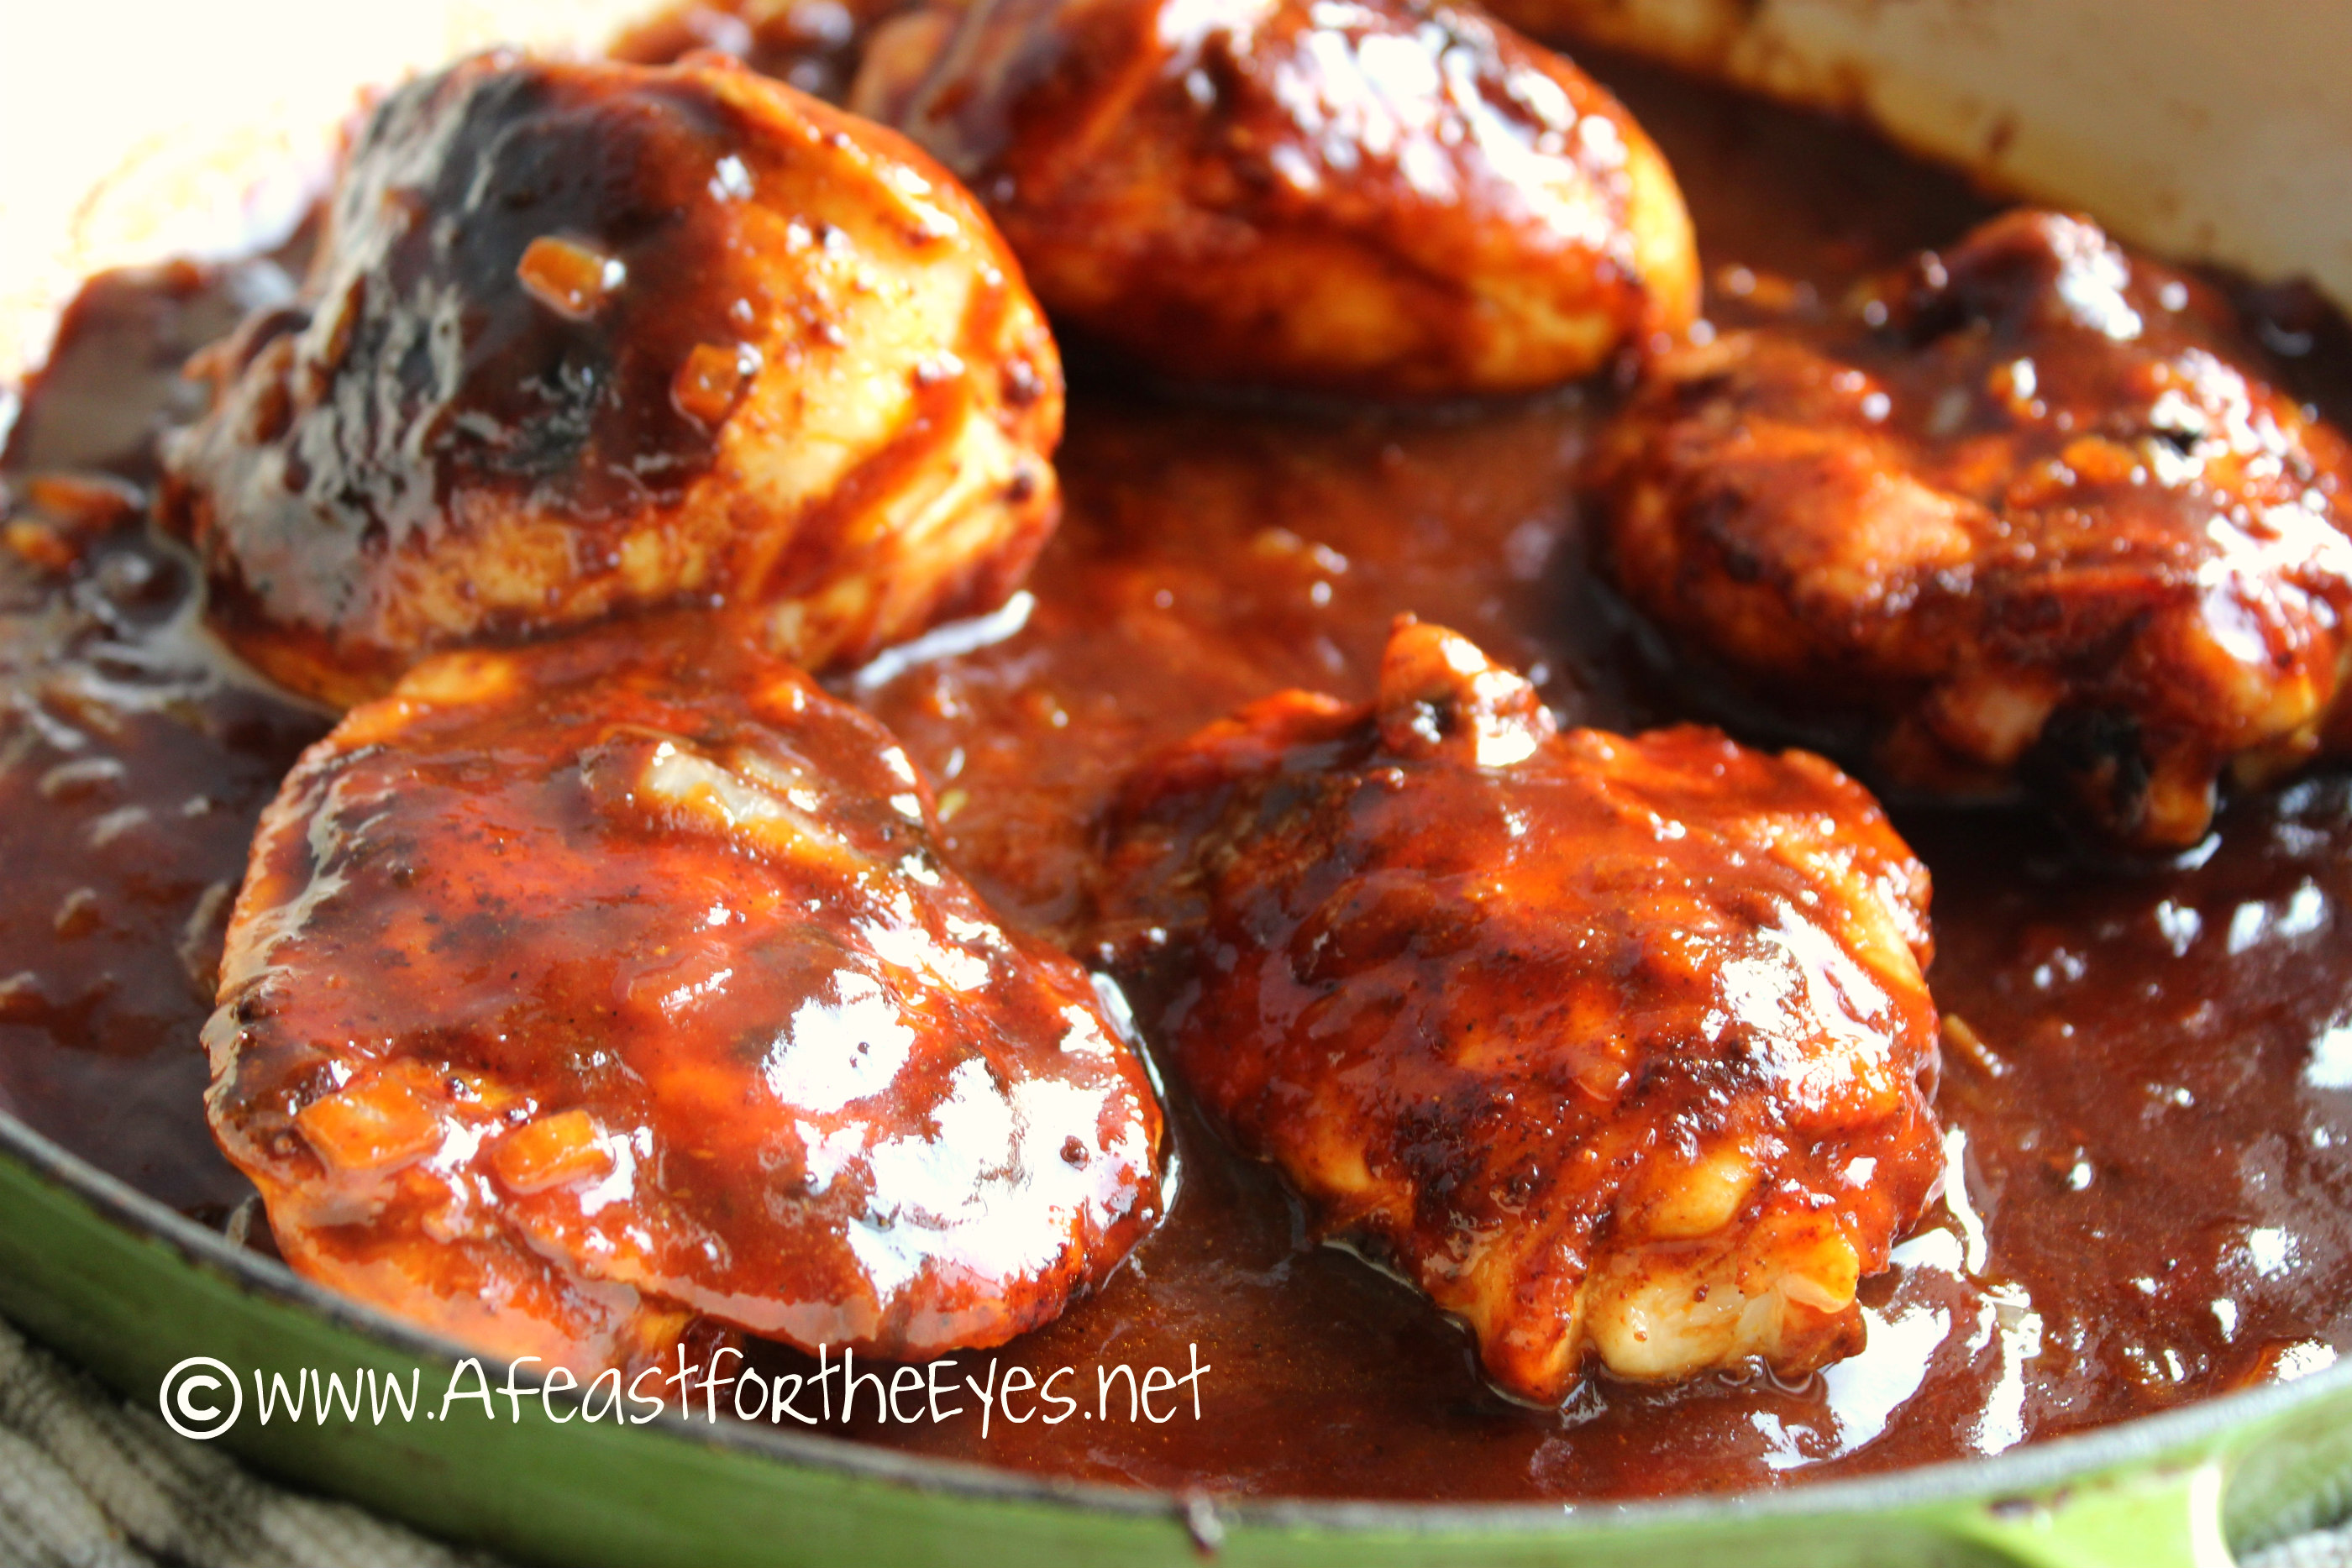 This Indoor Barbecue Chicken recipe really knocked our socks off-- from the juicy chicken to the quick homemade tangy barbecue sauce that was rich in flavor.  Best of all, the prep work wasn't uber time-consuming. A quick spice rub (with no weird ingredients) took a couple of minutes to mix together. The chicken is easily seared by placing into a screaming hot cast-iron skillet until roasted to perfection. As for the homemade barbecue sauce-- wow!  Just a few pantry ingredients, and it had a beautiful rich red color with a sweet and tangry finish to it. The sauce is good enough to bottle for so many uses! This is almost a "one-pan" dinner so this is a perfect week night meal to put together.  I am so making this again!